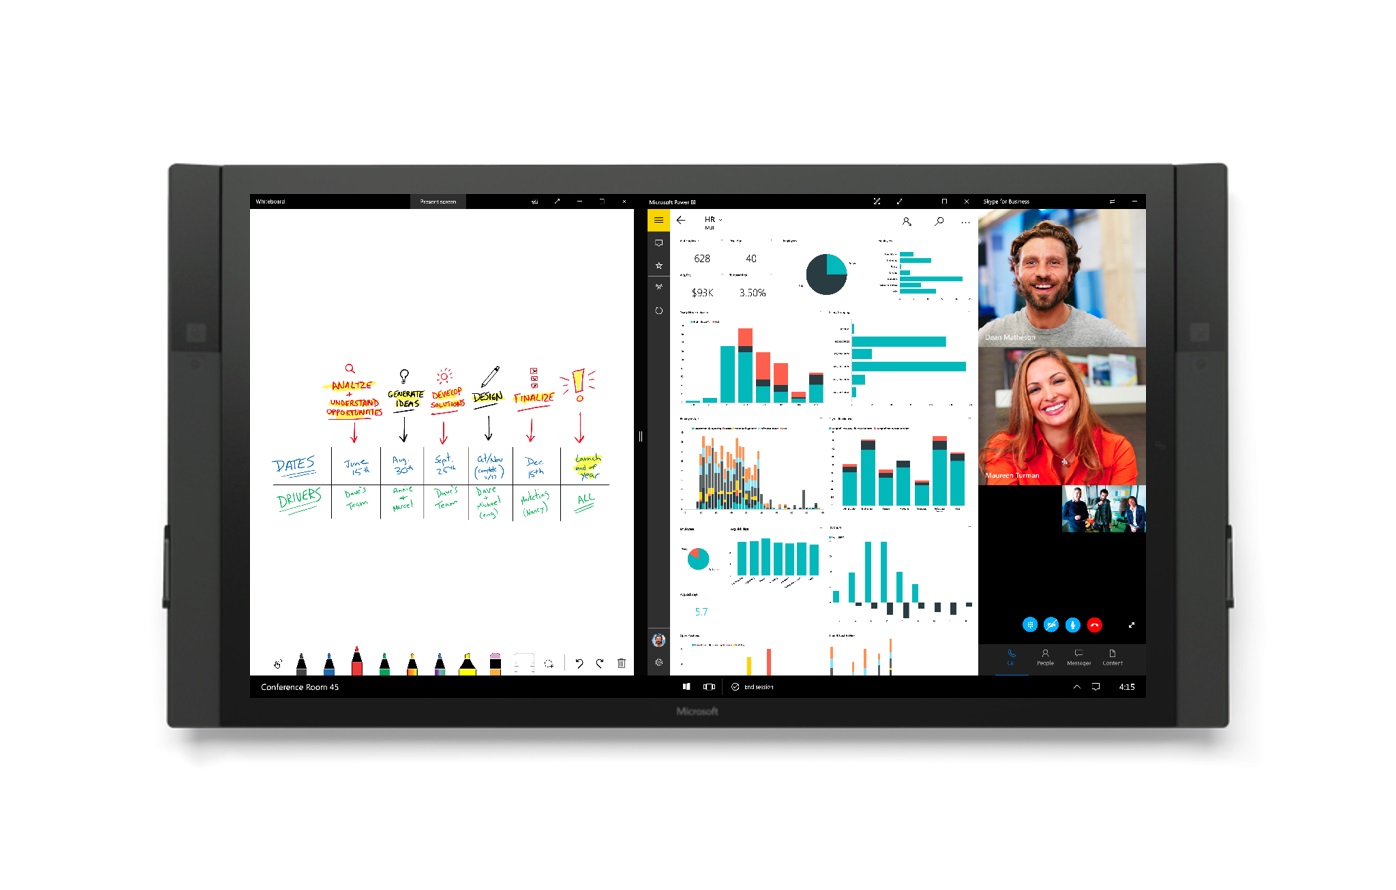 With the new Microsoft Whiteboard App, teams around the world can visually collaborate in real time with intelligent digital ink.